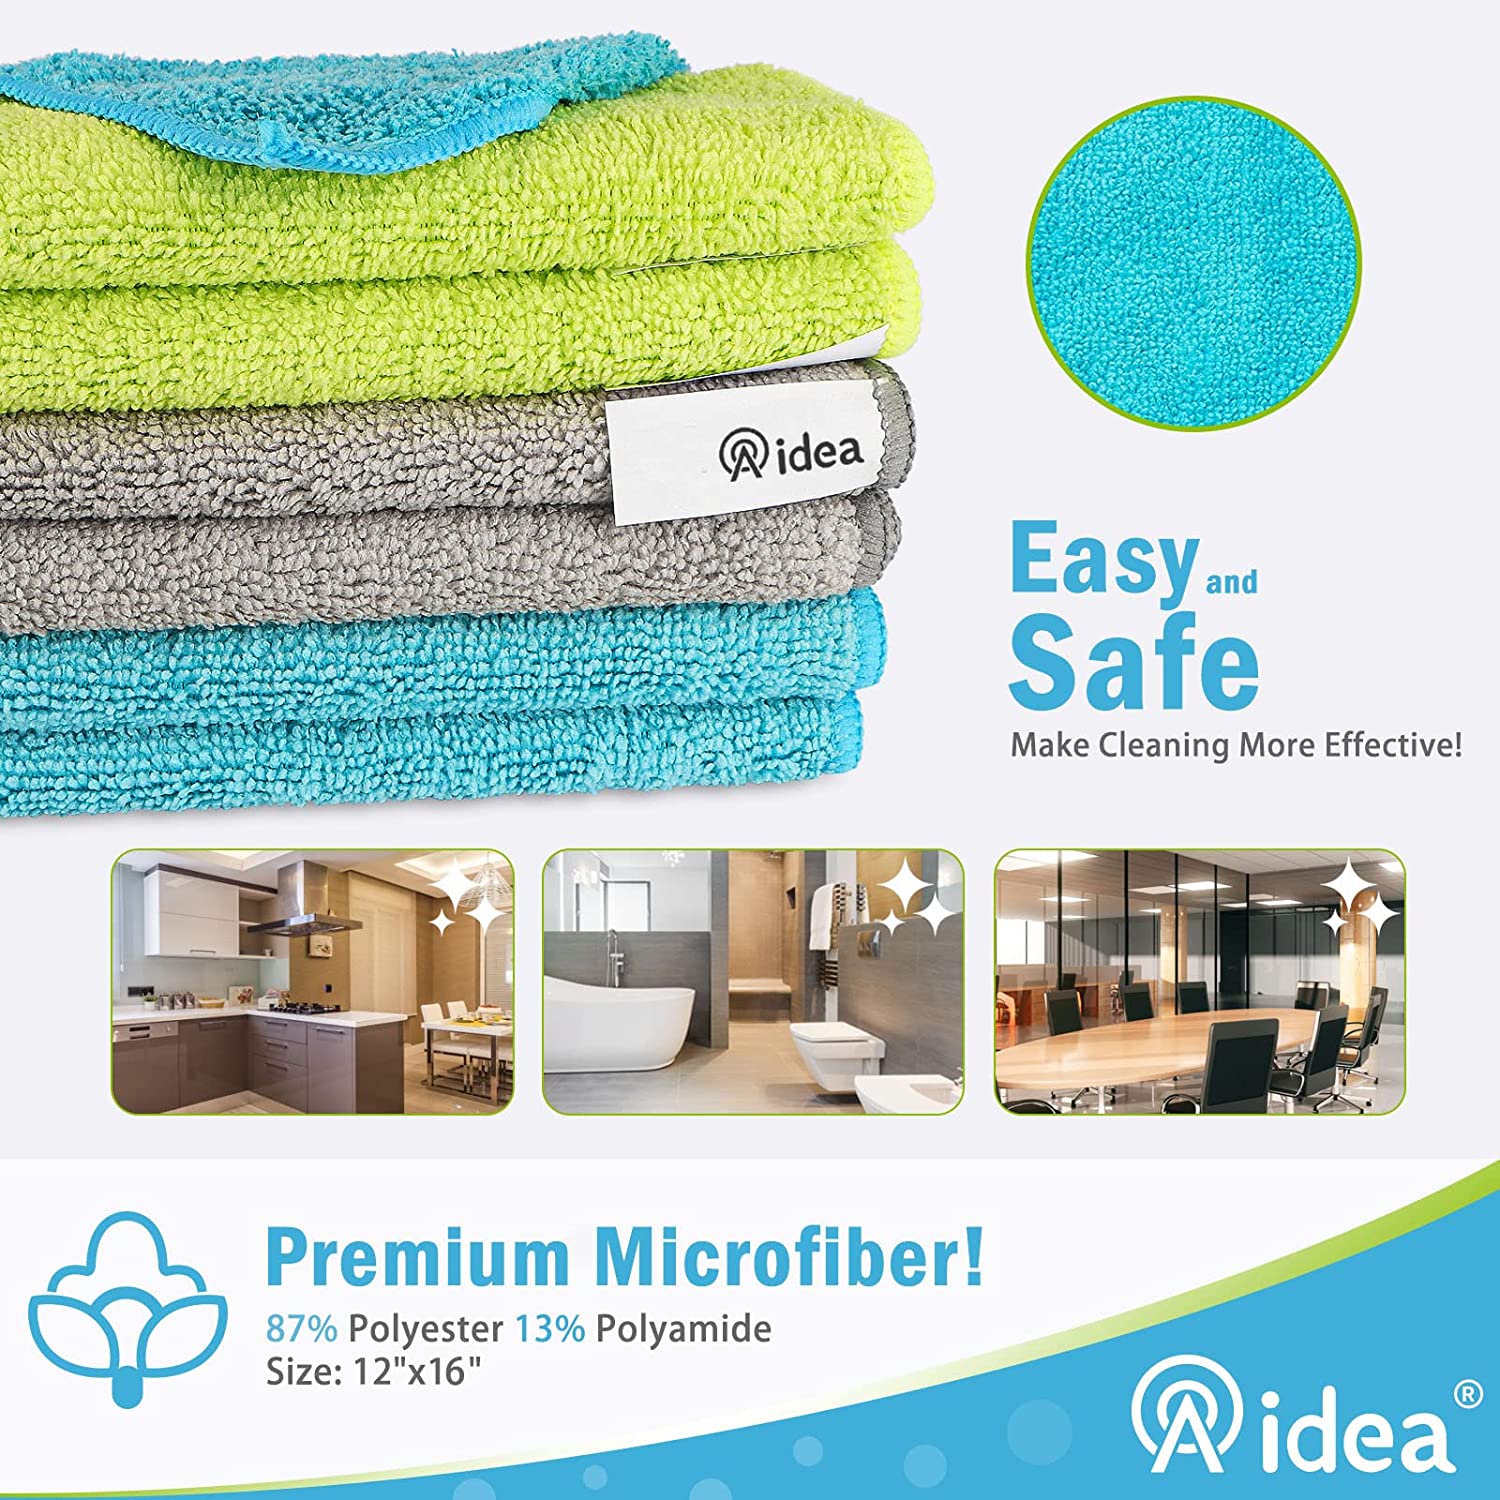 AIDEA Microfiber Cleaning Cloths-8PK, All-Purpose Softer Highly Absorbent,  Lint Free - Streak Free Wash Cloth for House, Kitchen, Car, Window